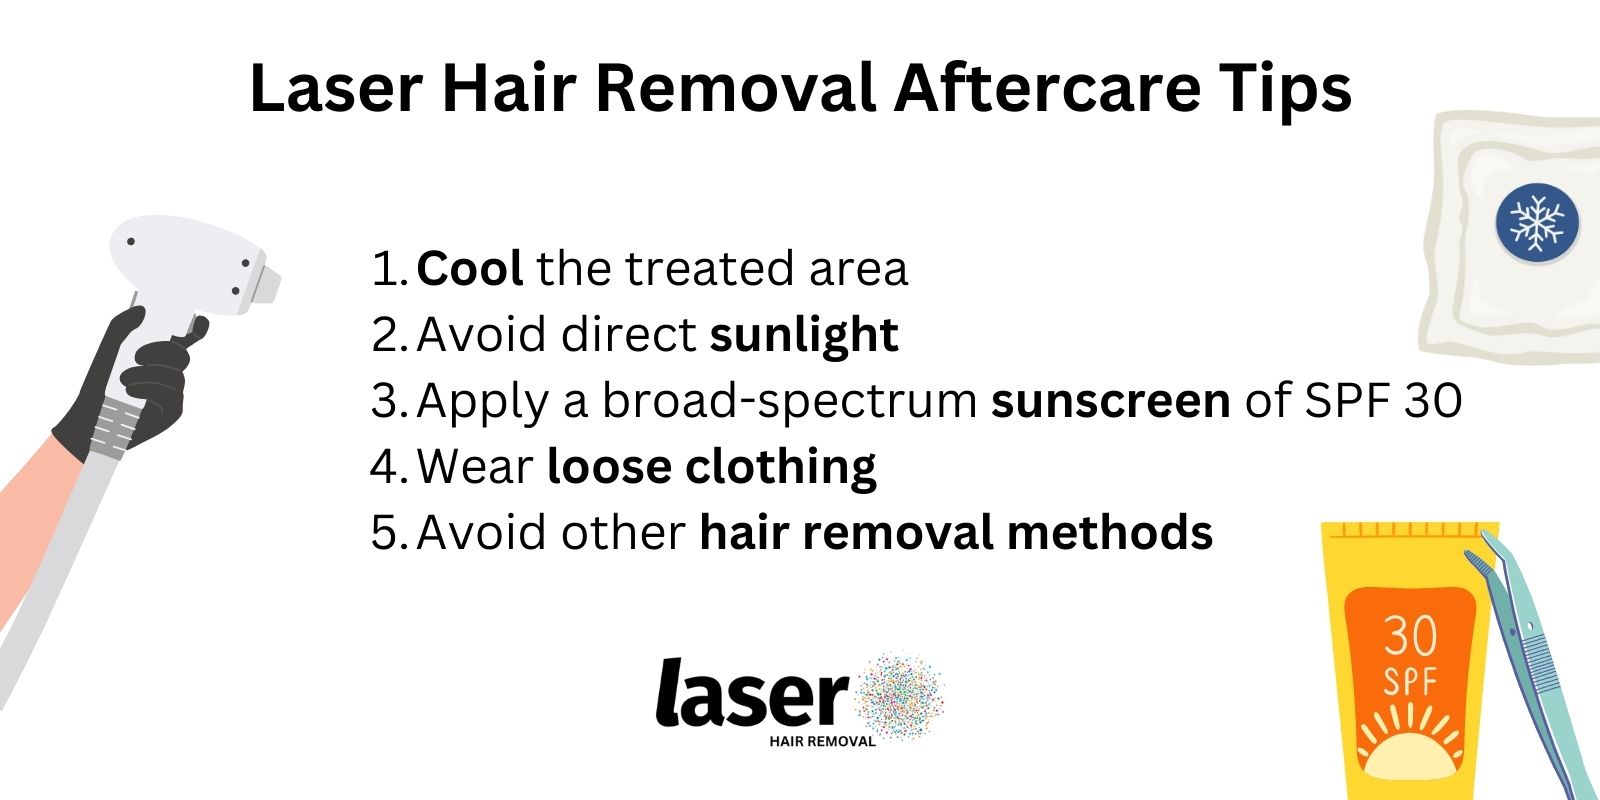 Laser Hair Removal Aftercare Tips